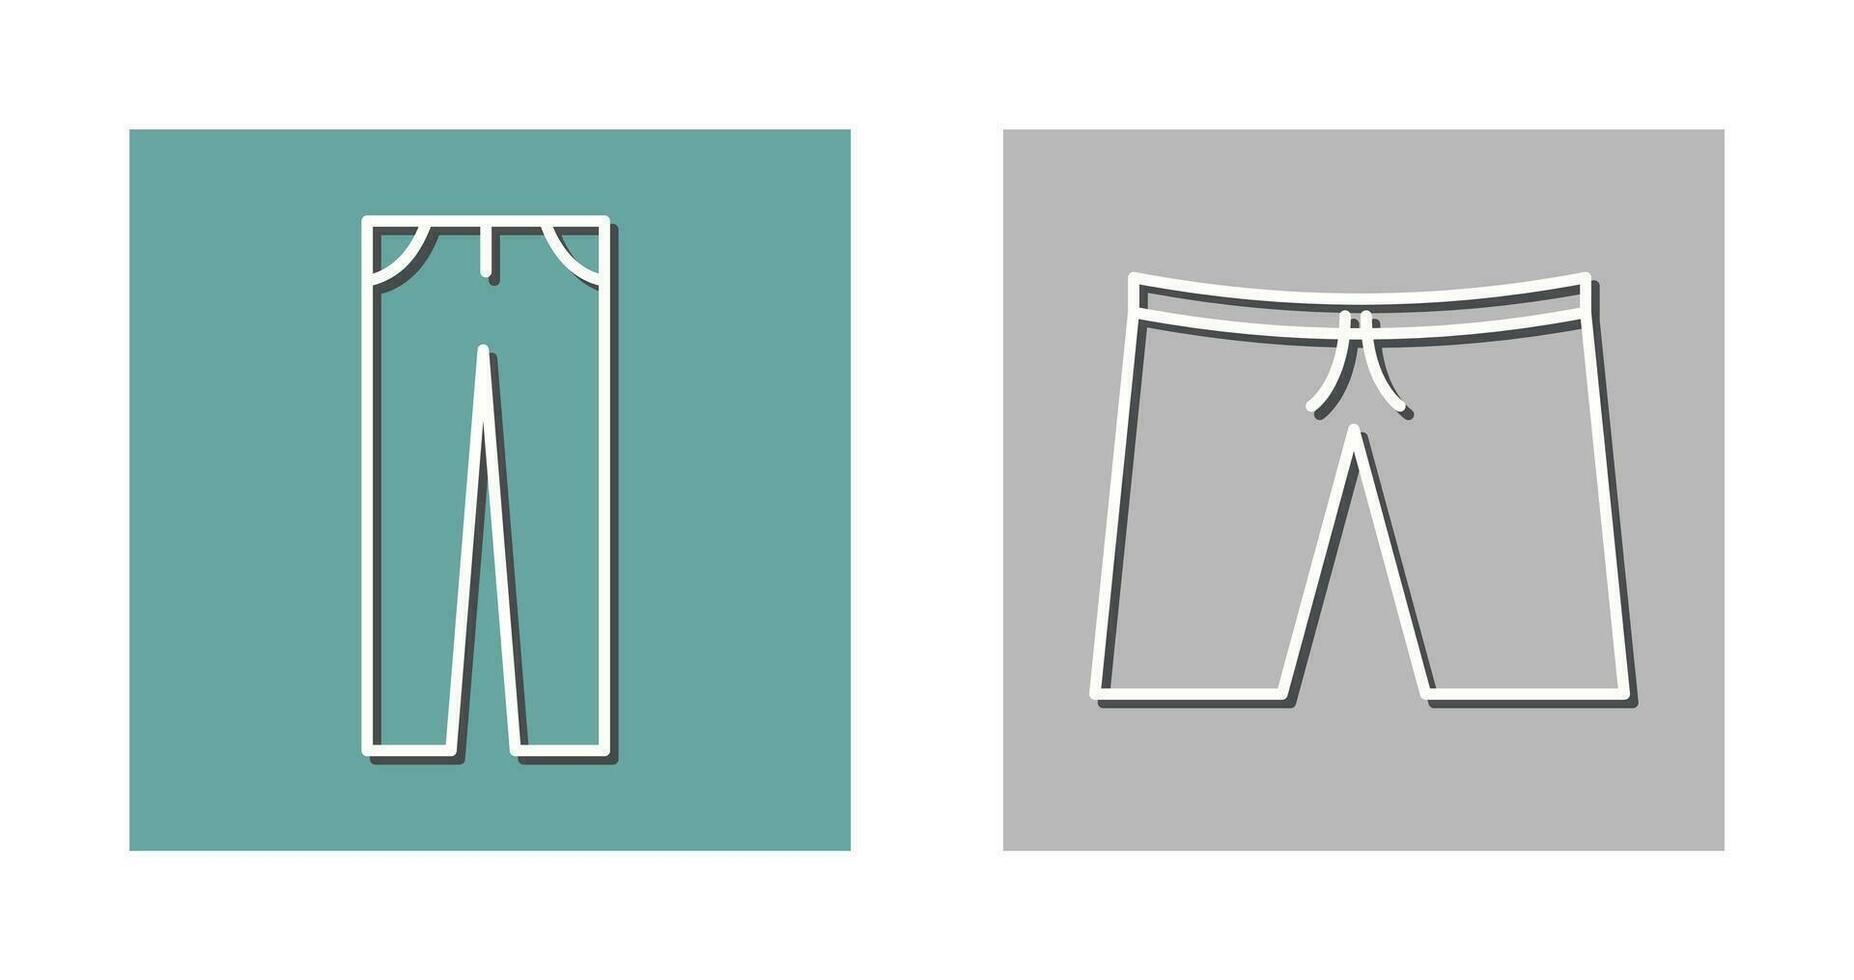 Pants and Shorts  Icon vector